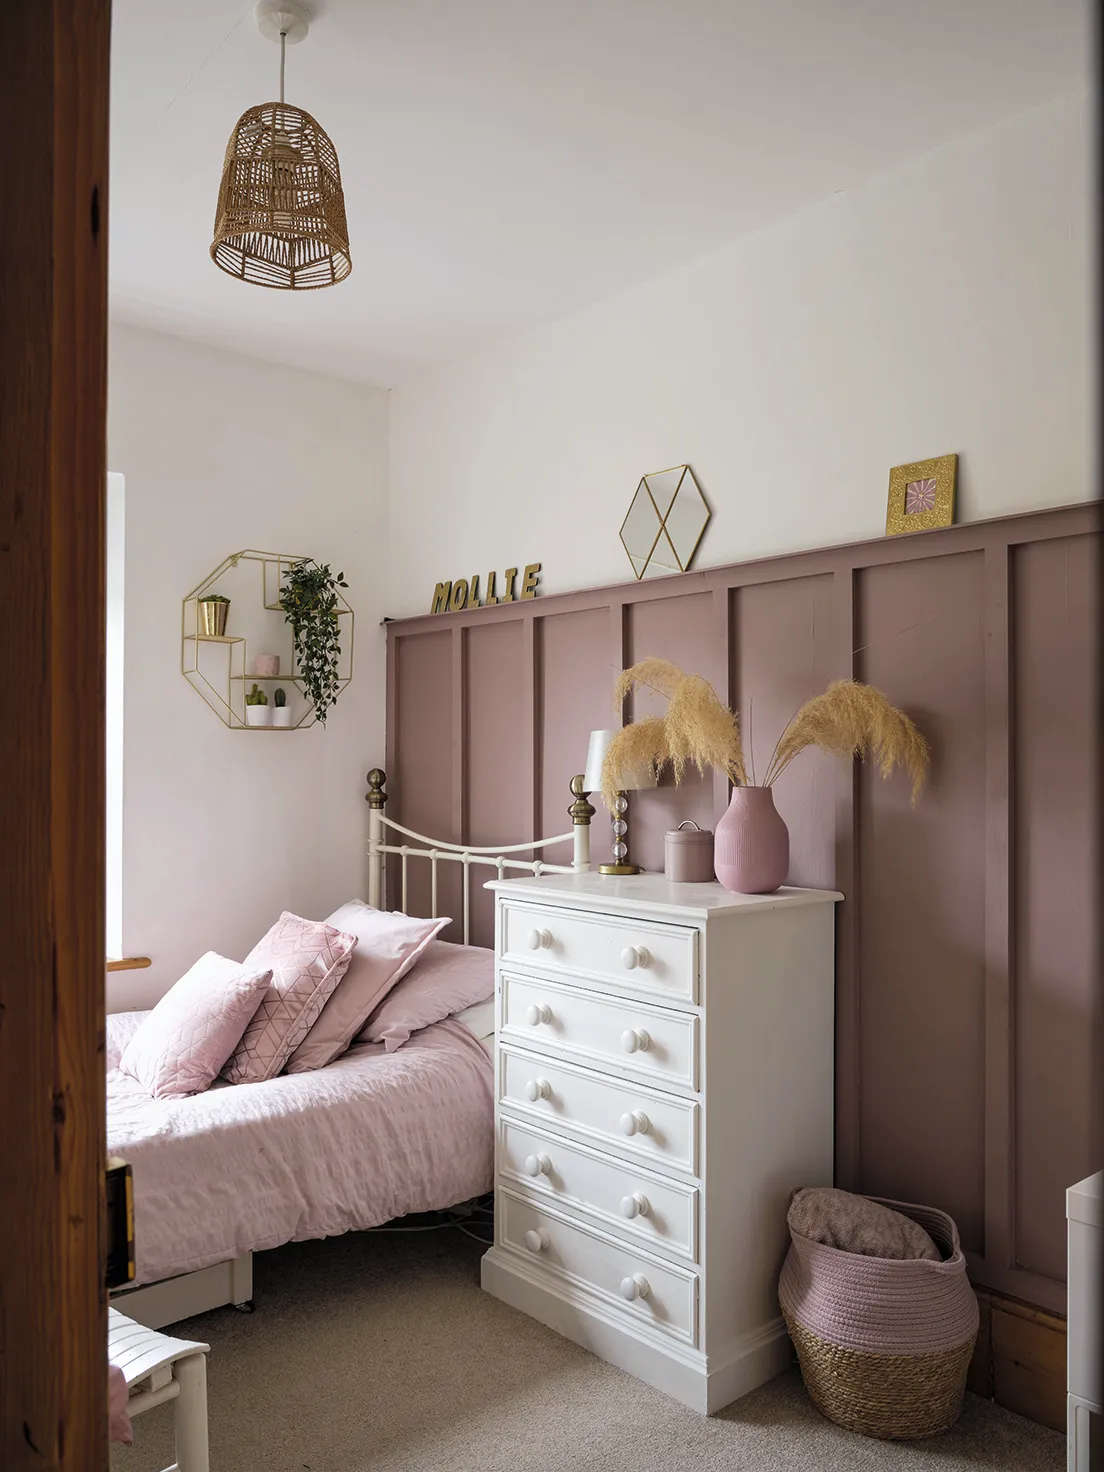 Ali has paired DIY panelling with geometric accessories in her daughter’s bedroom to make it youthful and trendy, yet in keeping with the classic look of the house